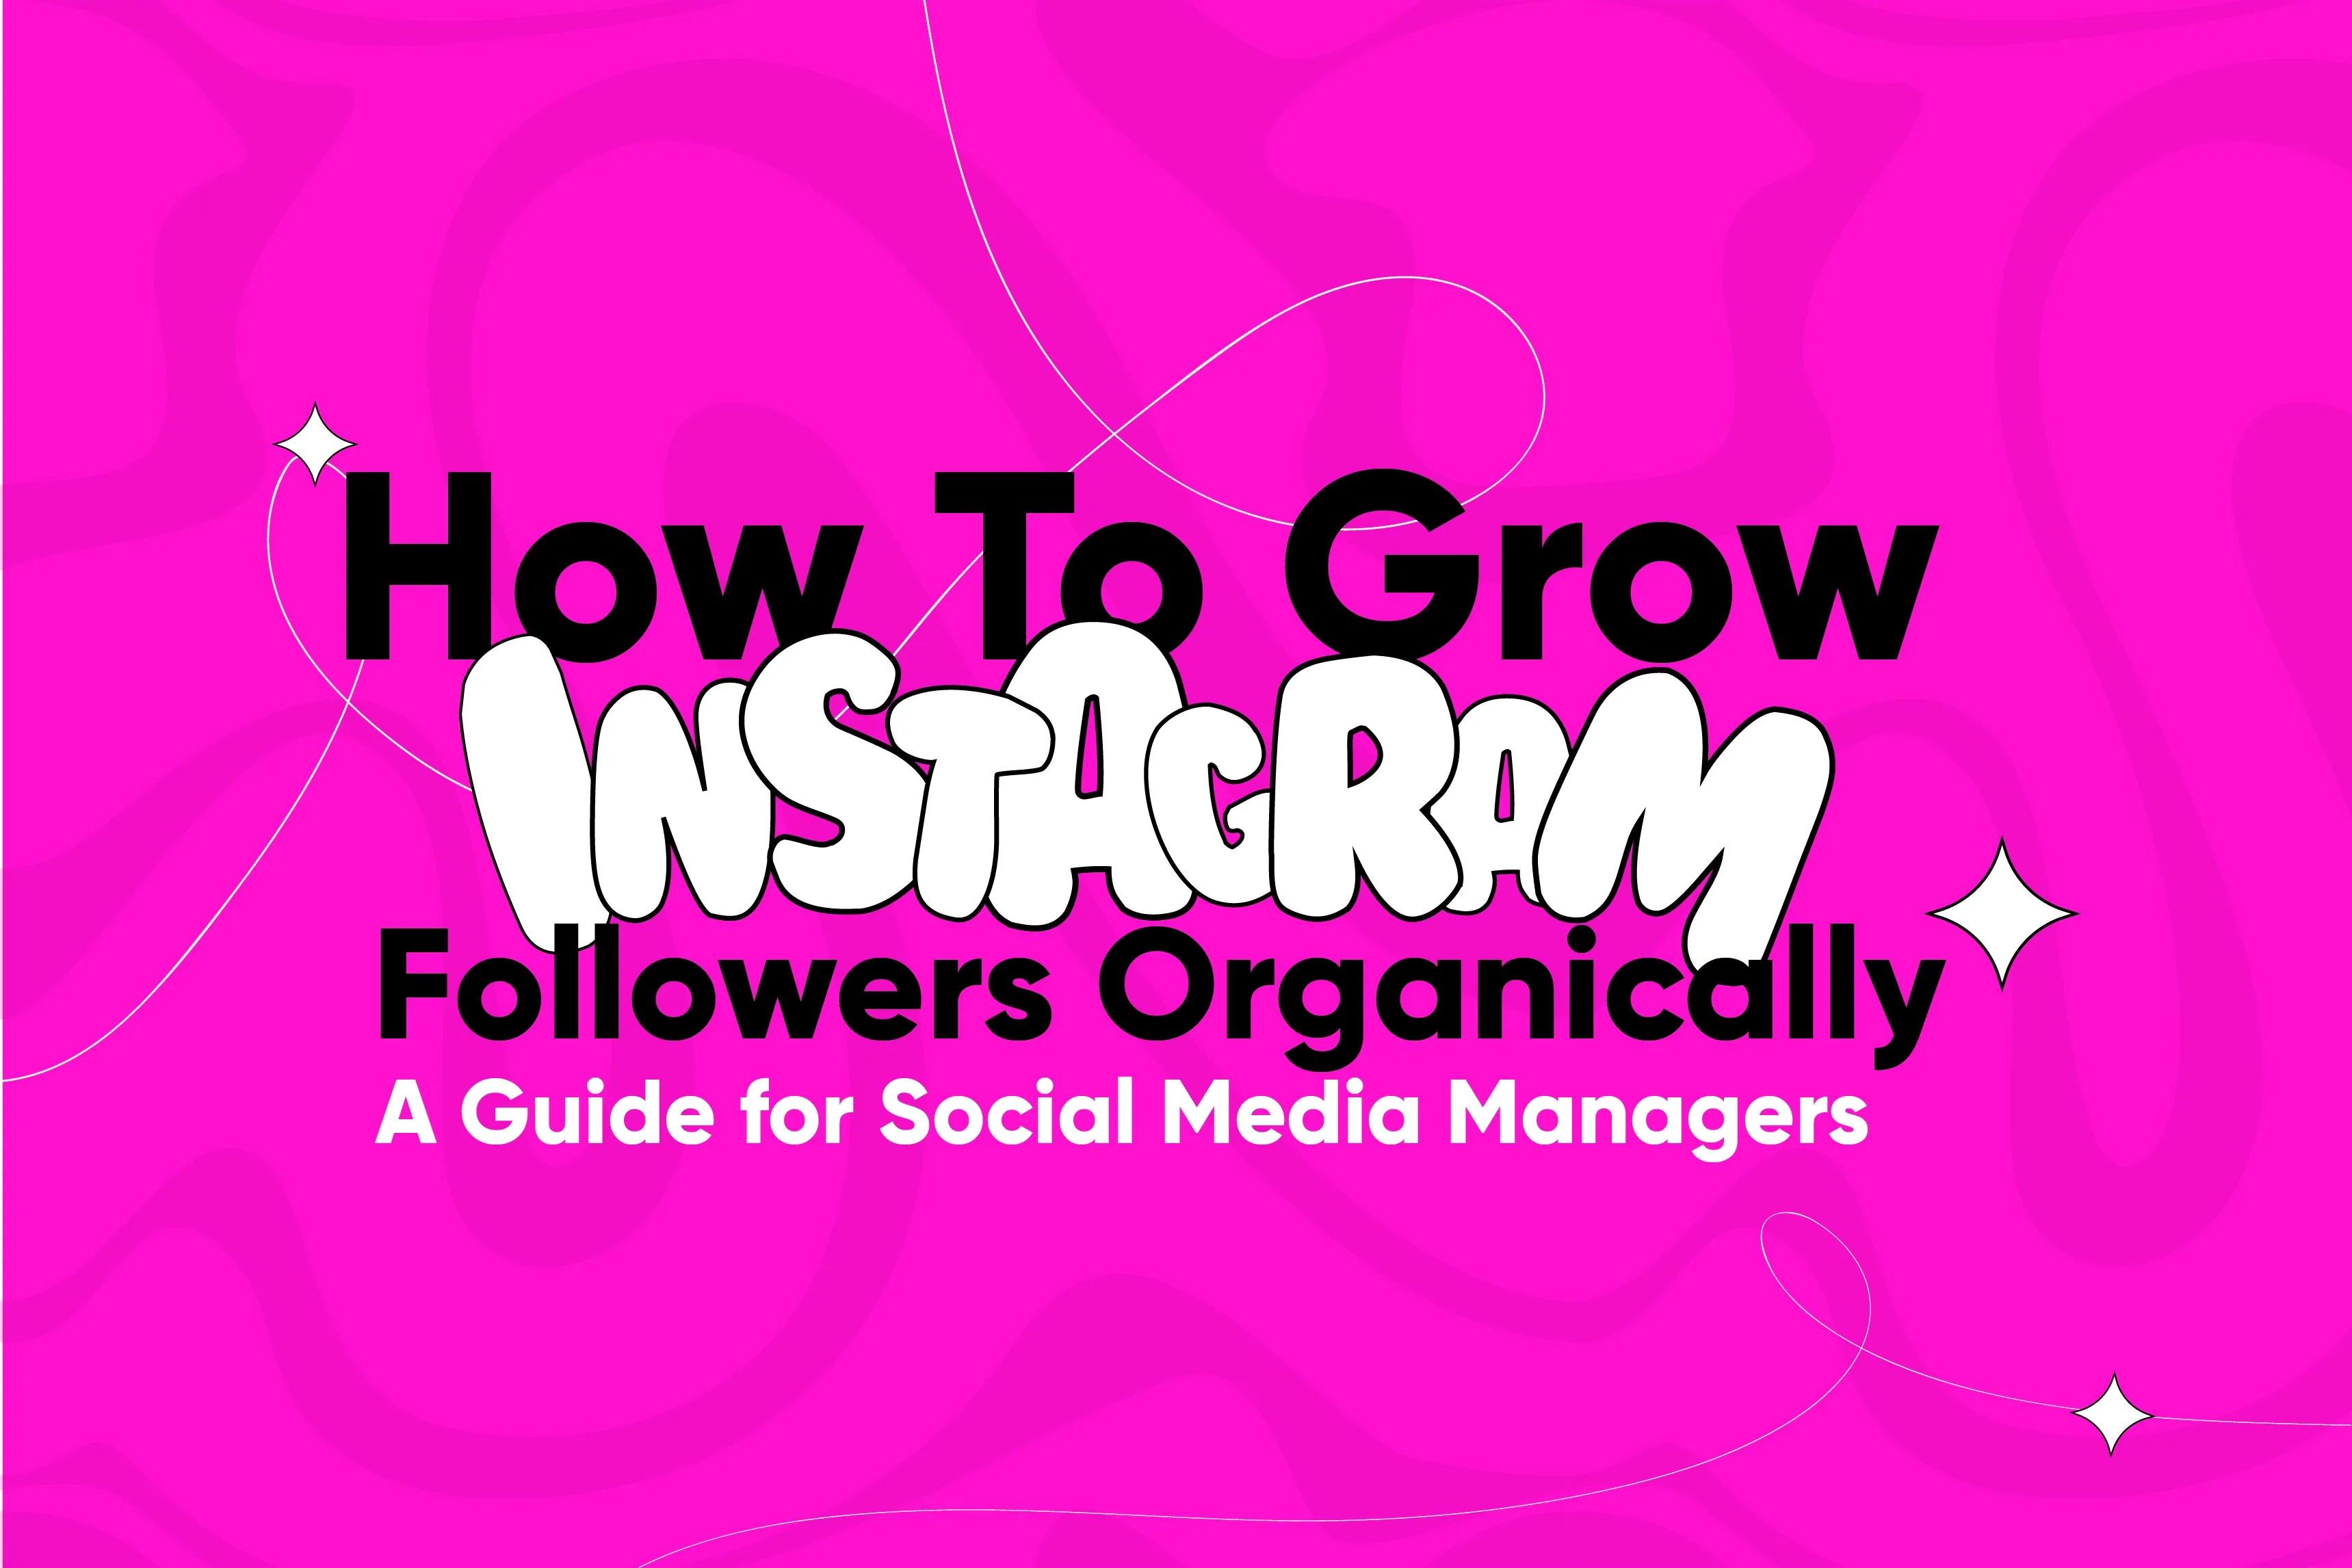 How to grow Instagram followers organically: A Guide for Social Media Managers 